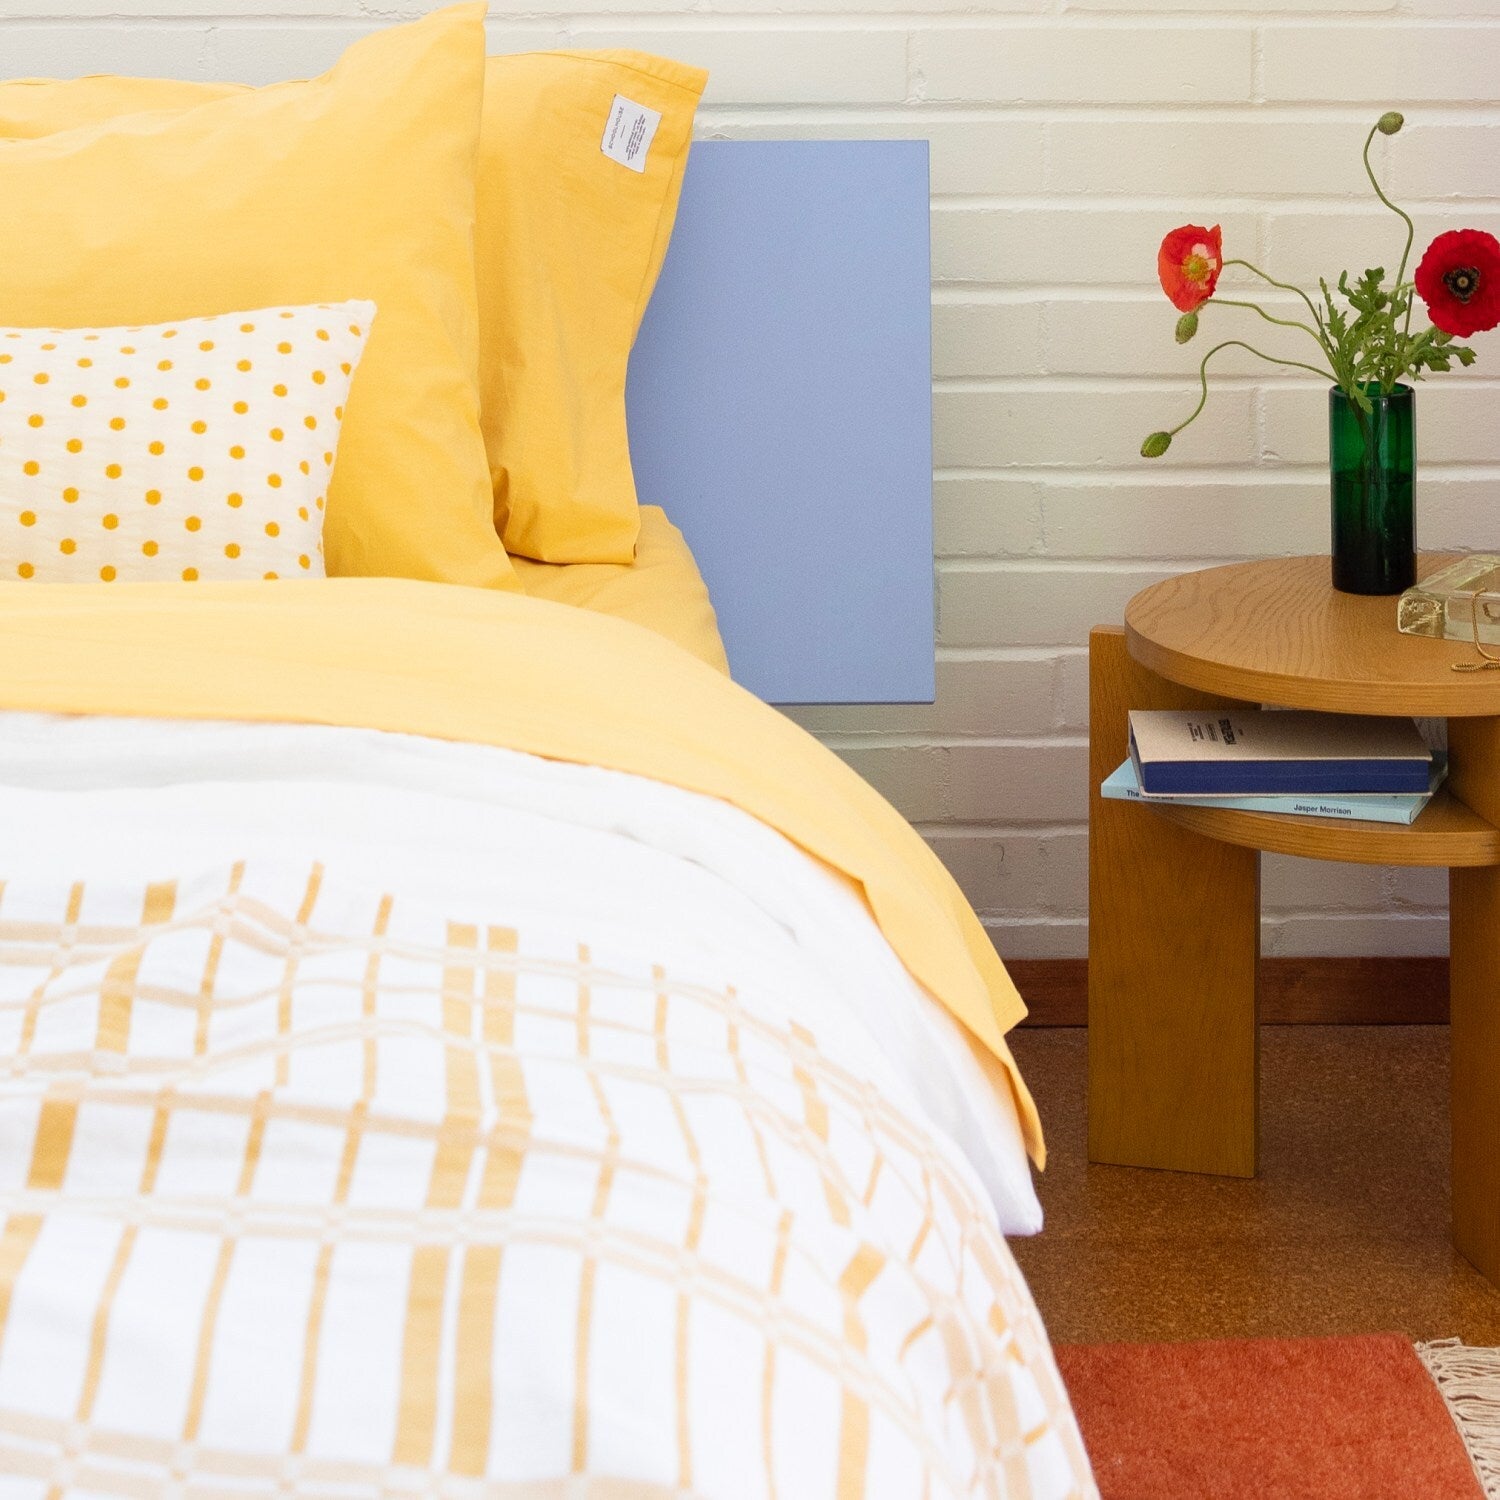 Layered yellow bedding on a blue bed.